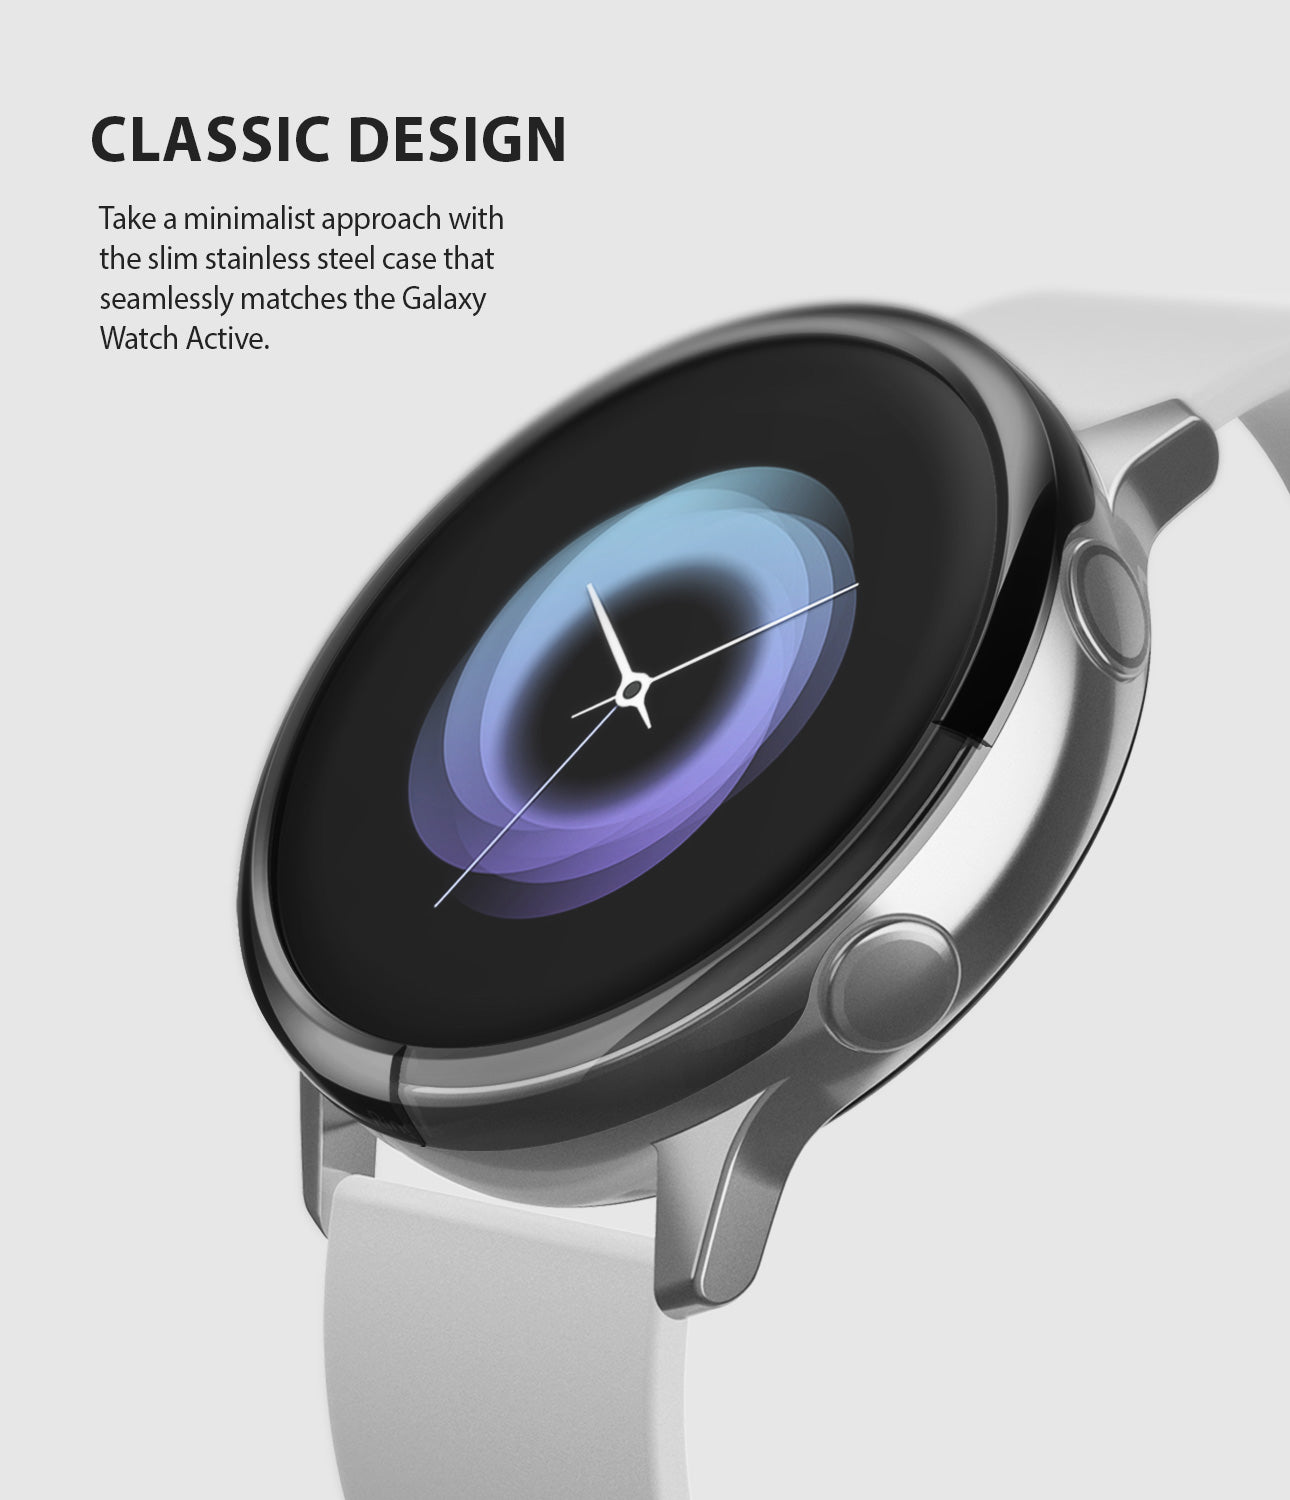 ringke bezel styling for galaxy watch active stainless steel minimalistic design to seamlessly match the device